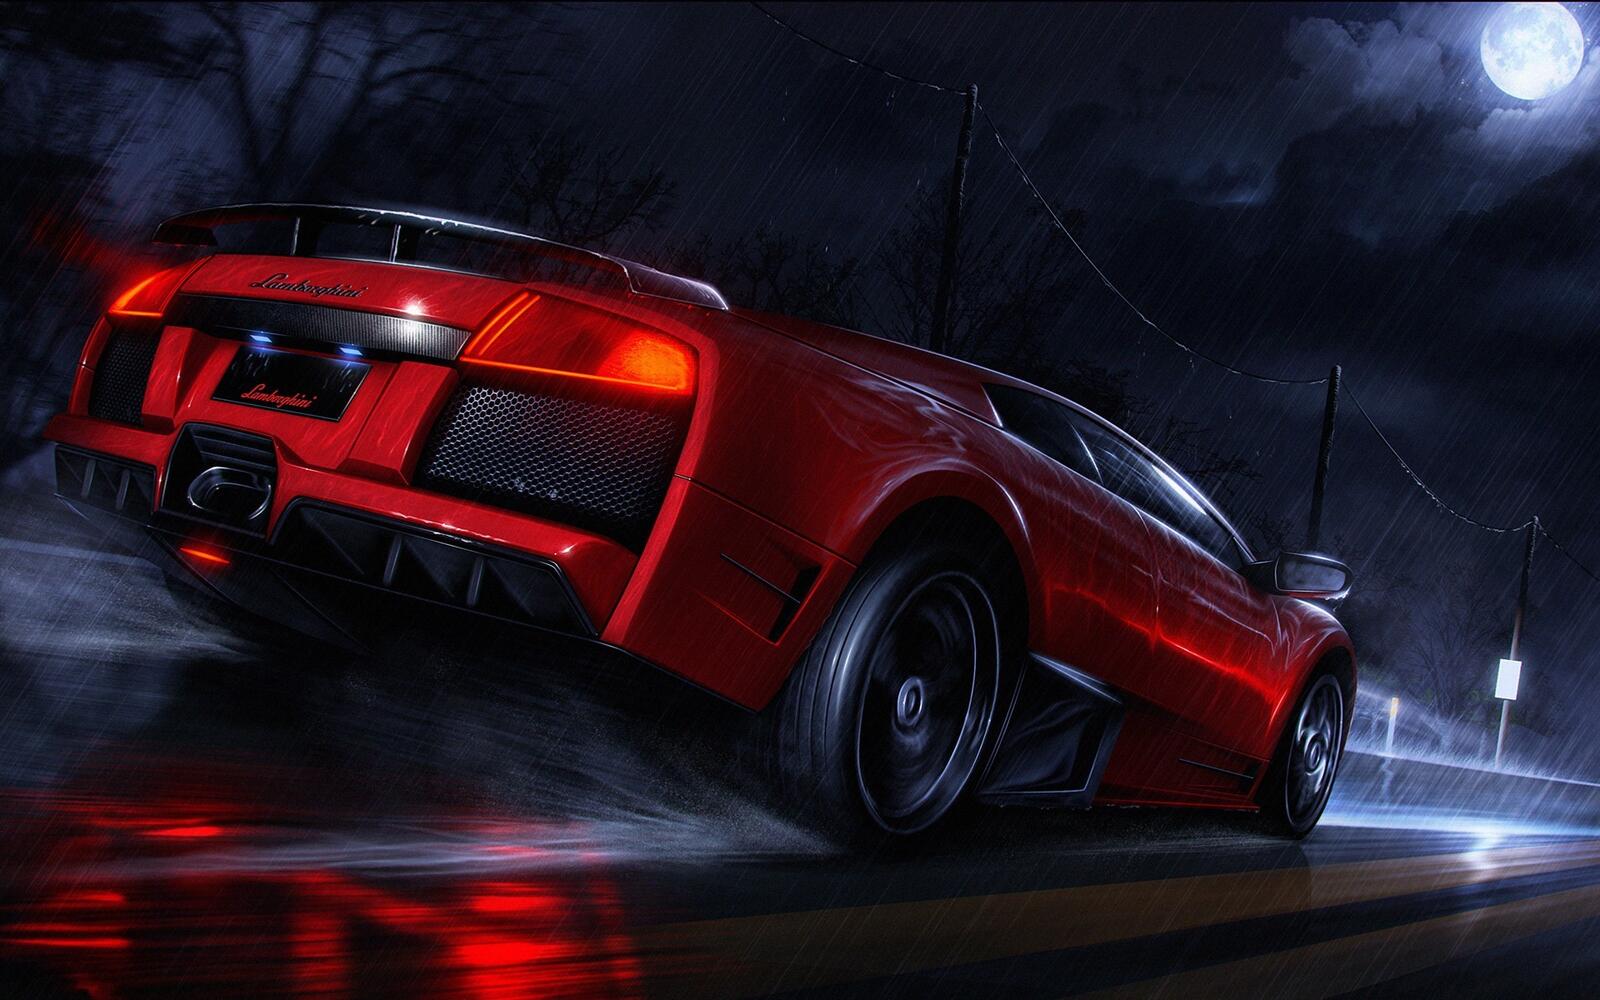 Free photo A red Lamborghini driving on a wet night road.